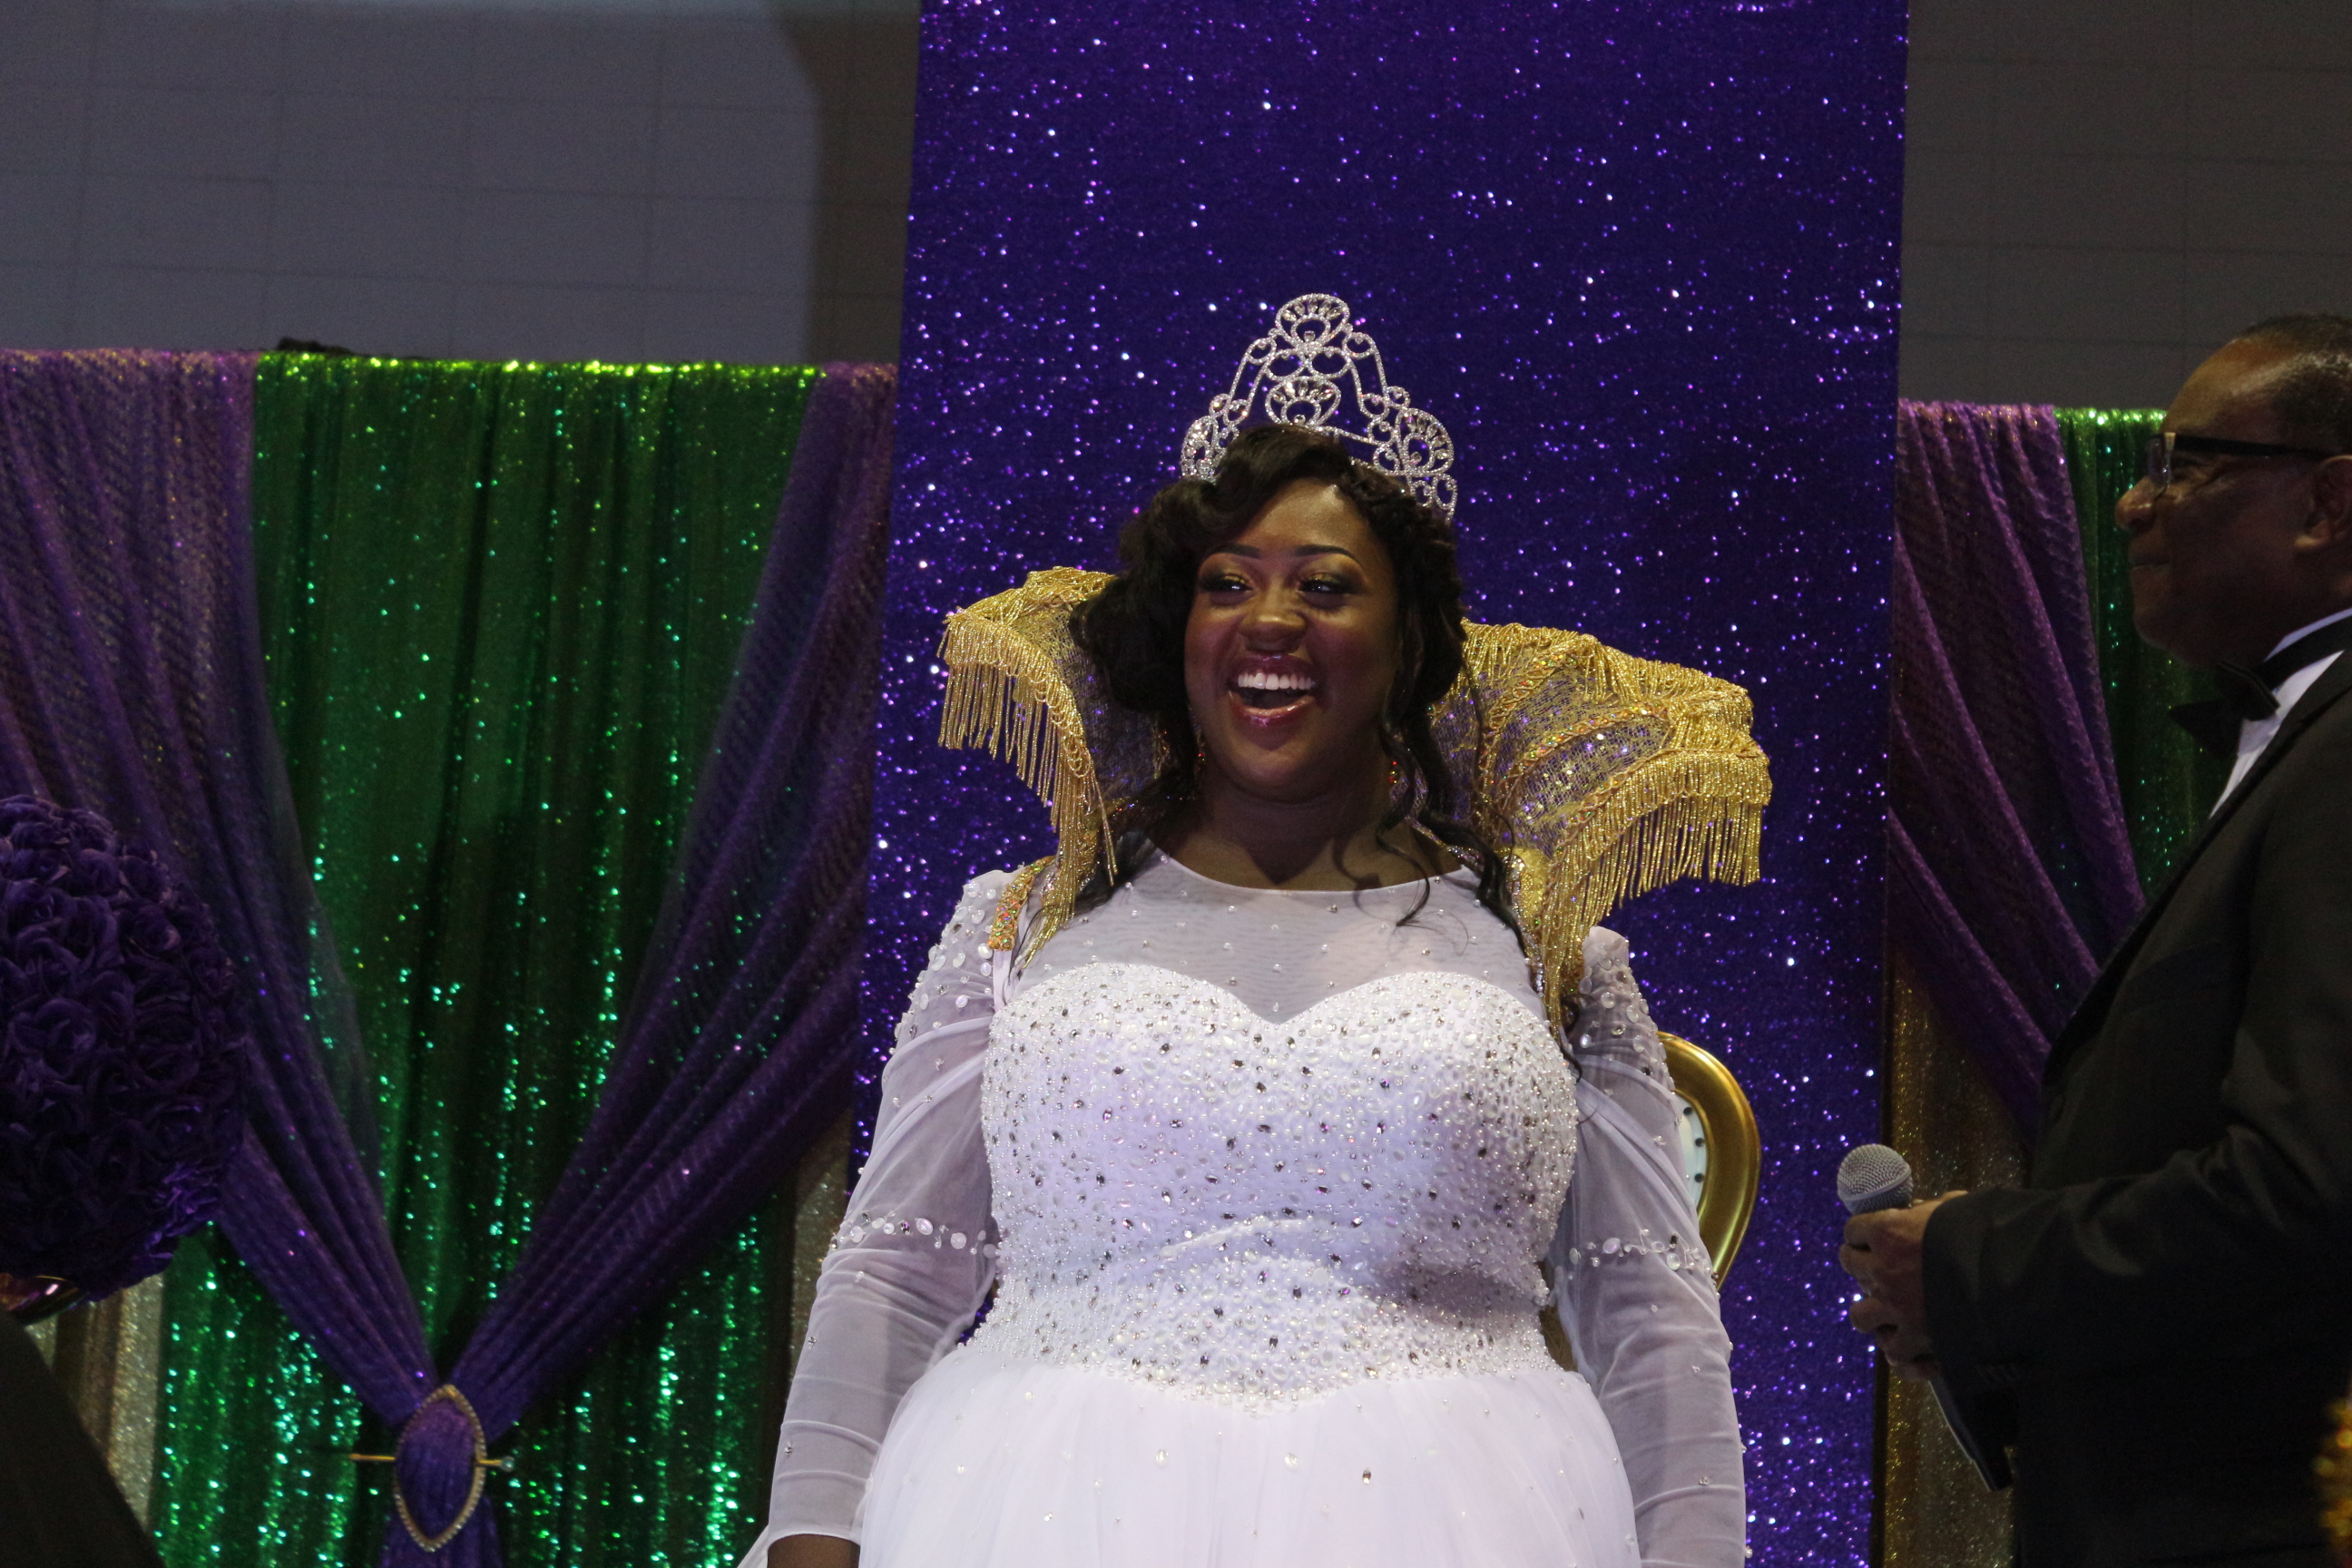 The Coronation of Moriah Batiest: A Night to Remember